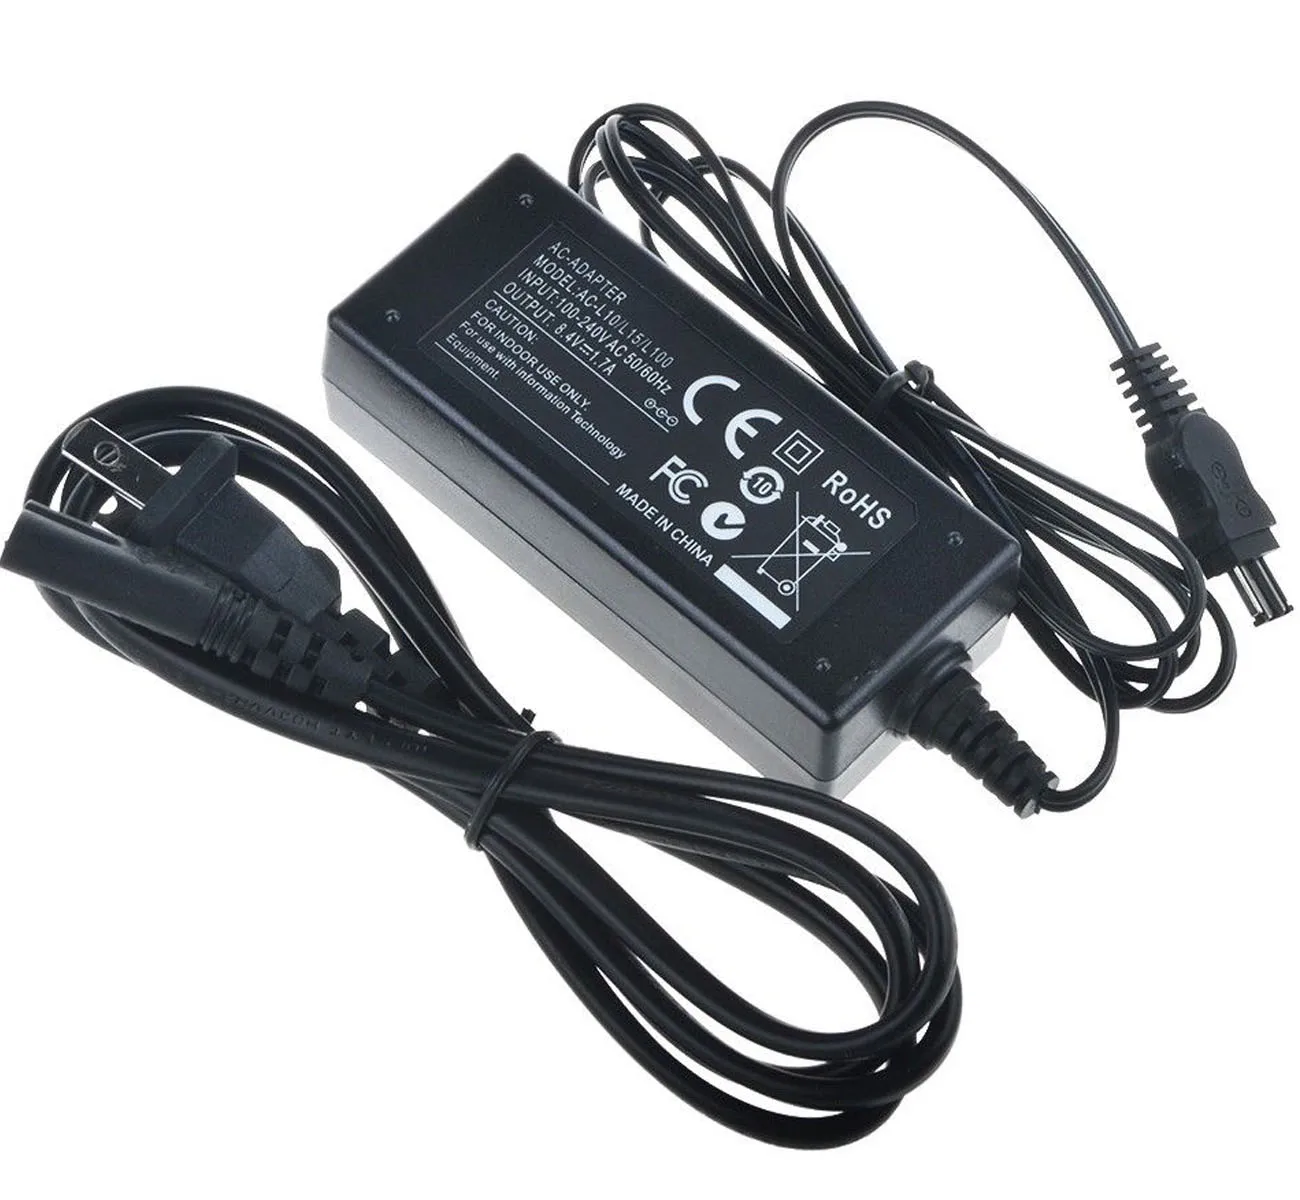 DCR-PC103 DCR-PC104 DCR-PC101 DCR-PC105 DCR-PC115 Handycam Camcorder Dual Channel Battery Charger for Sony DCR-PC100 